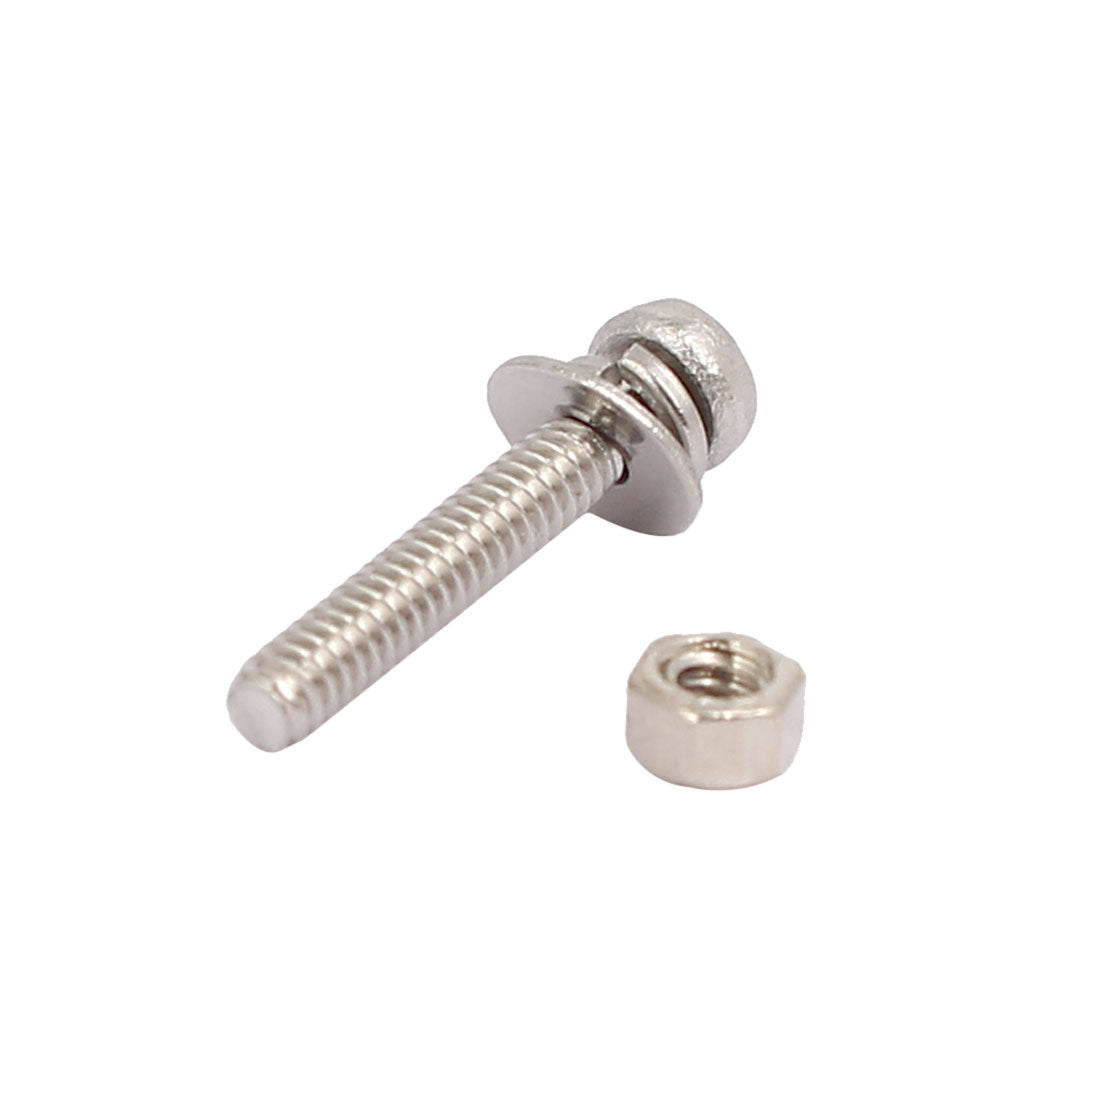 uxcell Uxcell M1.6x10mm 304 Stainless Steel Phillips Pan Head Bolt Screw Nut w Washer 25 Sets